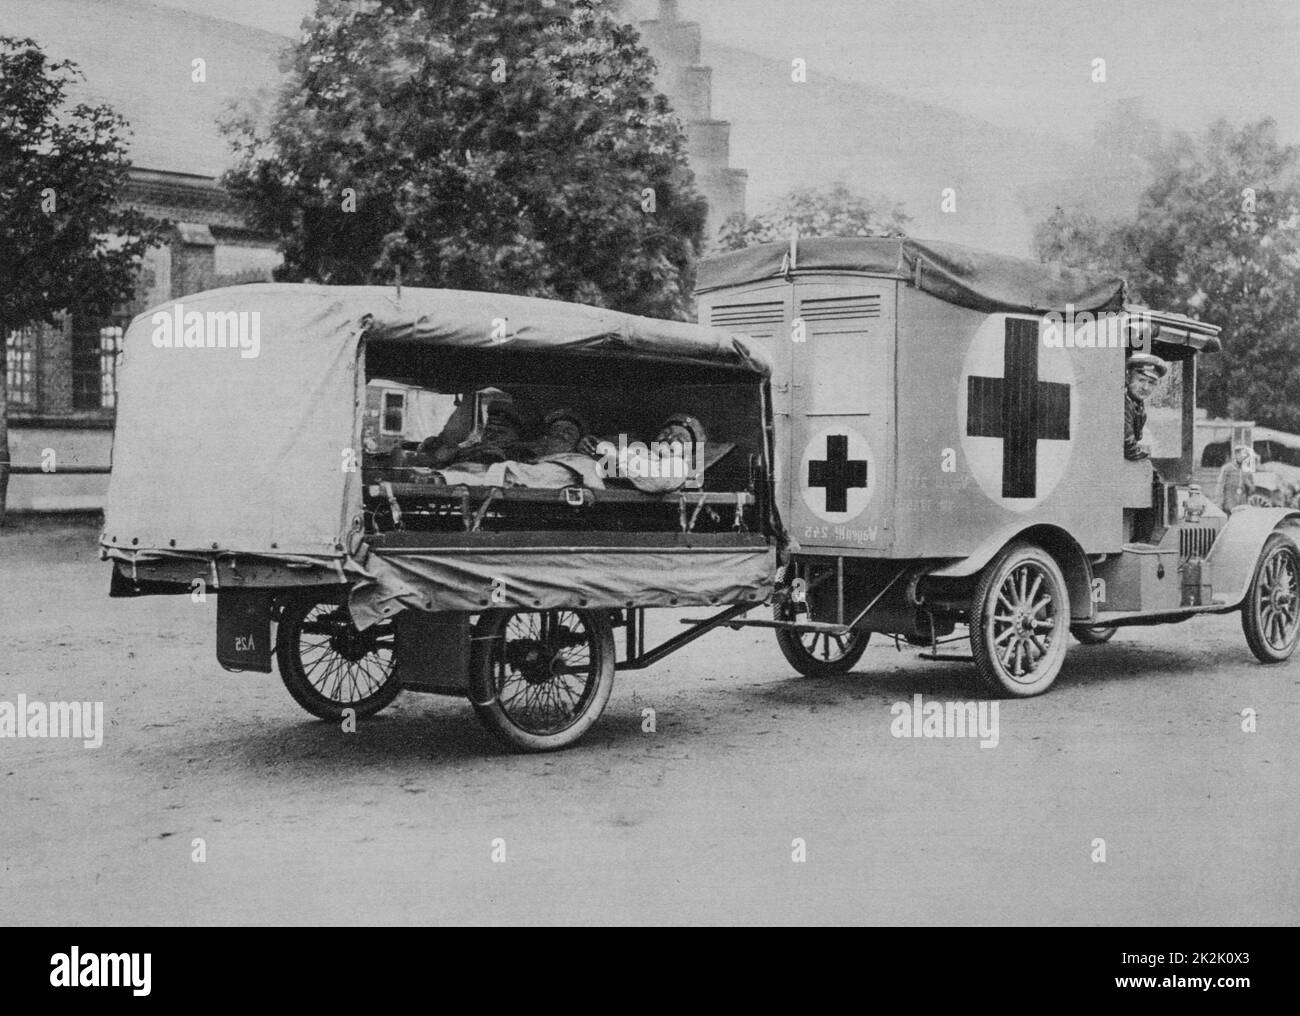 World War I 1914-1918: Wounded German soldiers on stretchers in a motorised ambulance painted with the Red Cross, Eatern Front, 1915. Military, Army, Medicine, Casualty, Automobile Stock Photo